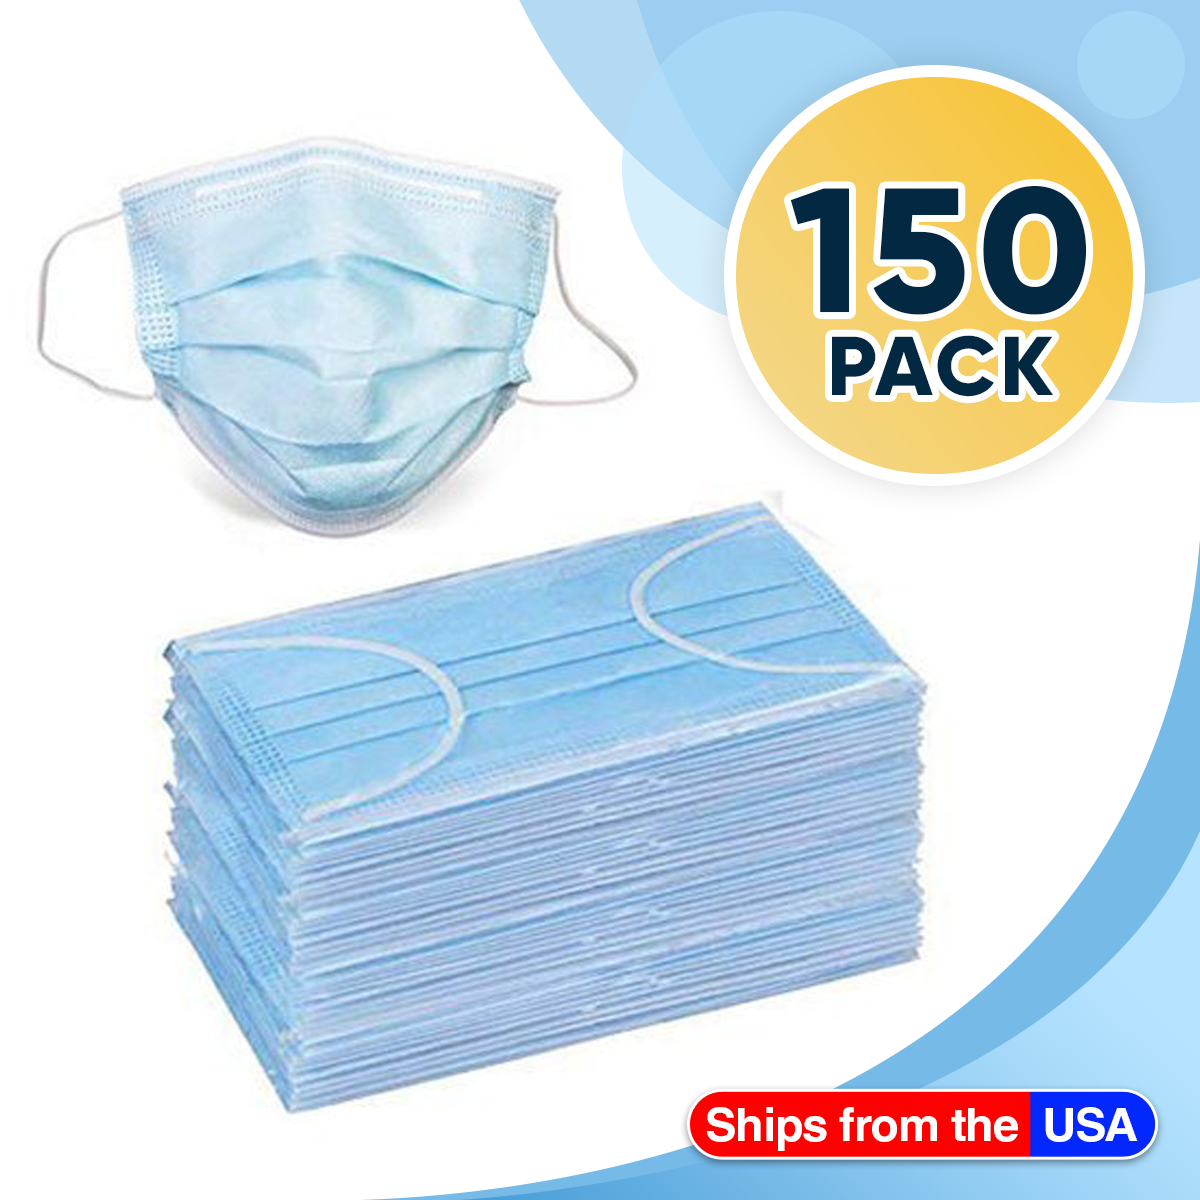 150 Disposable Face Masks, 3-ply Breathable Masks, Elastic Ear Loop Mask - image 1 of 2